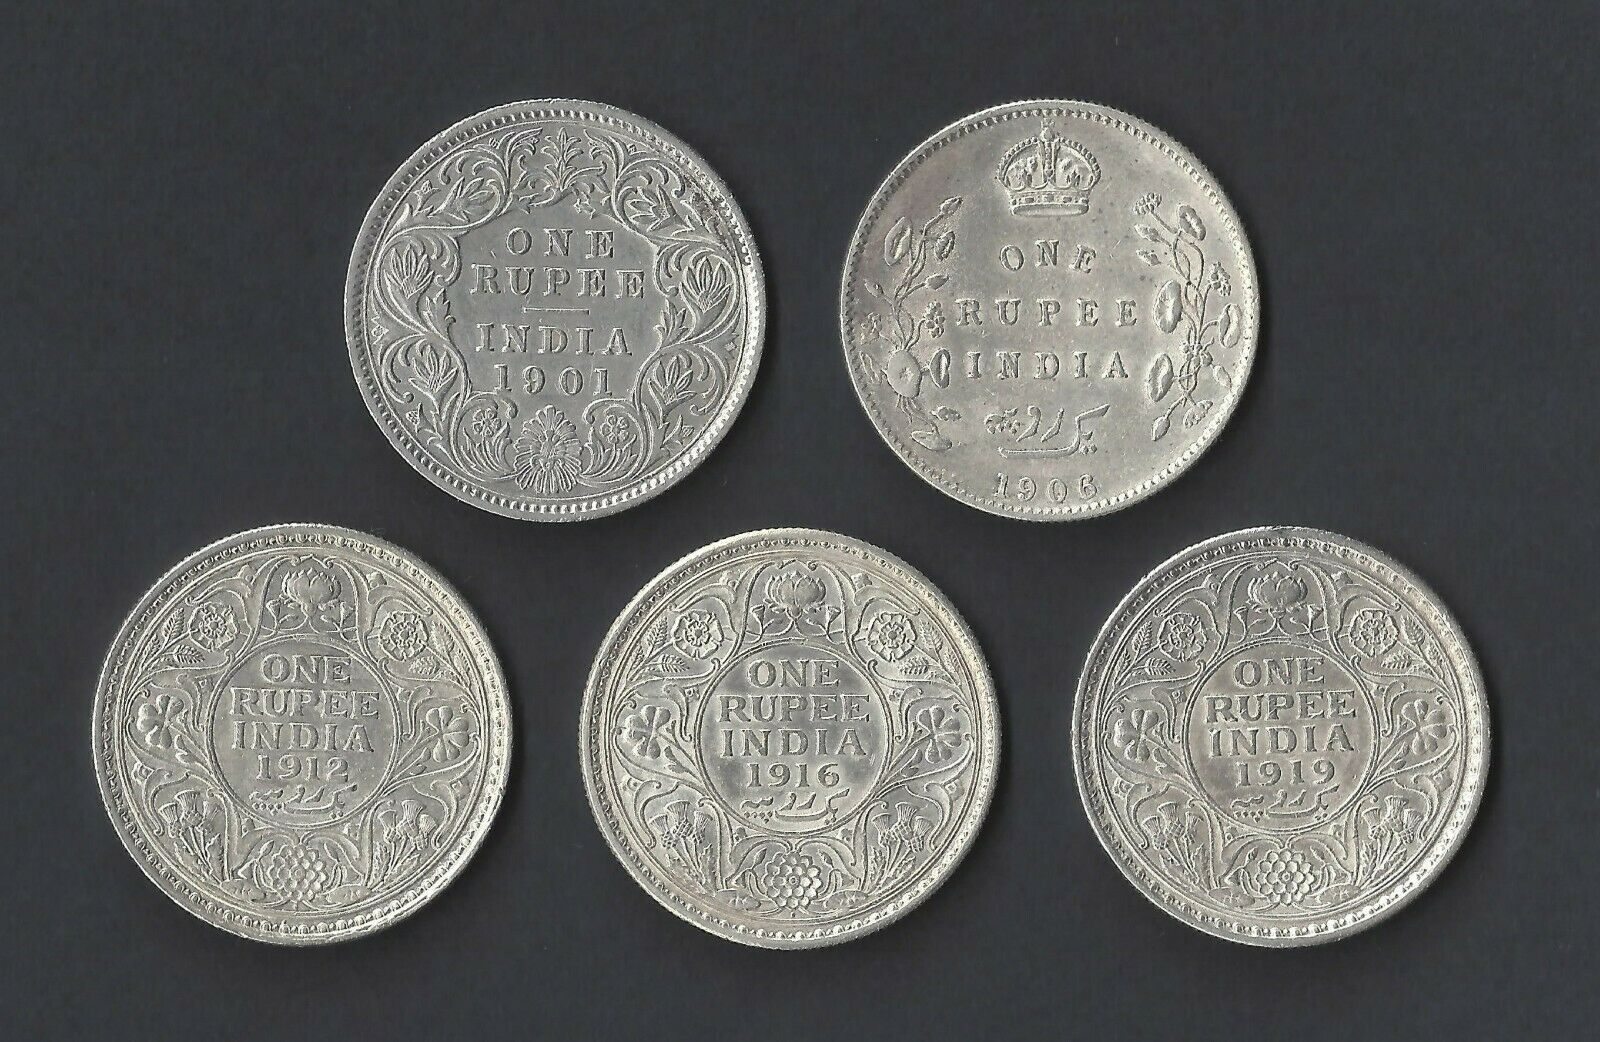 Lot Of 5 Different .917 Silver India One Rupee, 1901 - 1919